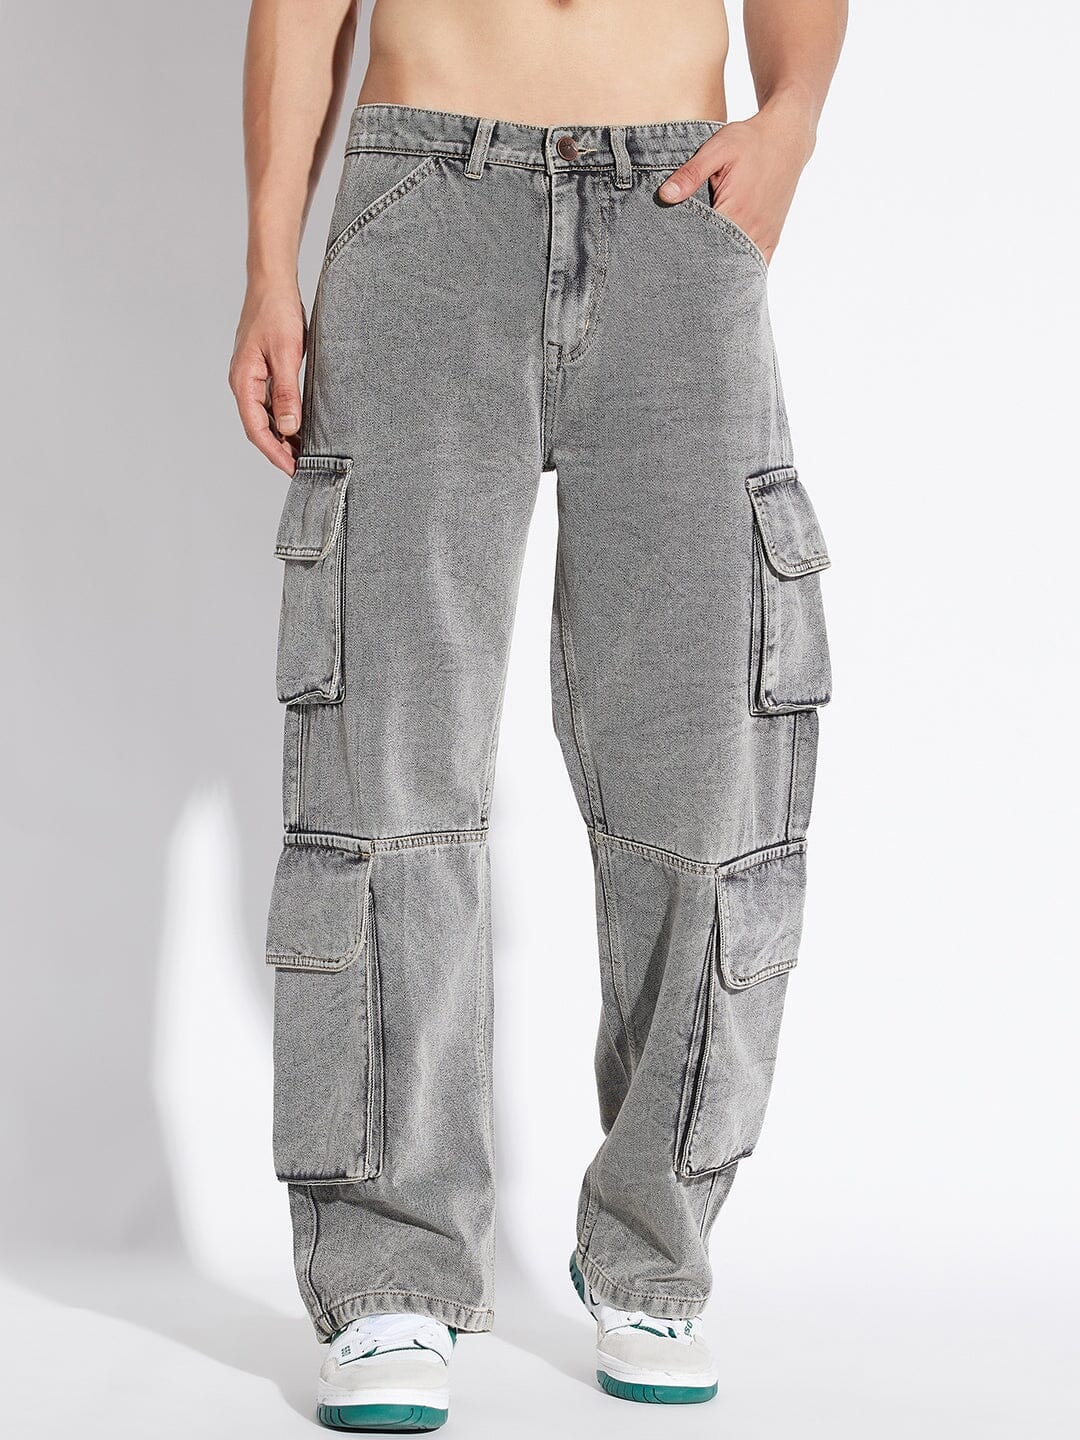 BDG Baggy Skate Fit Cargo Jean | Urban Outfitters Mexico - Clothing, Music,  Home & Accessories